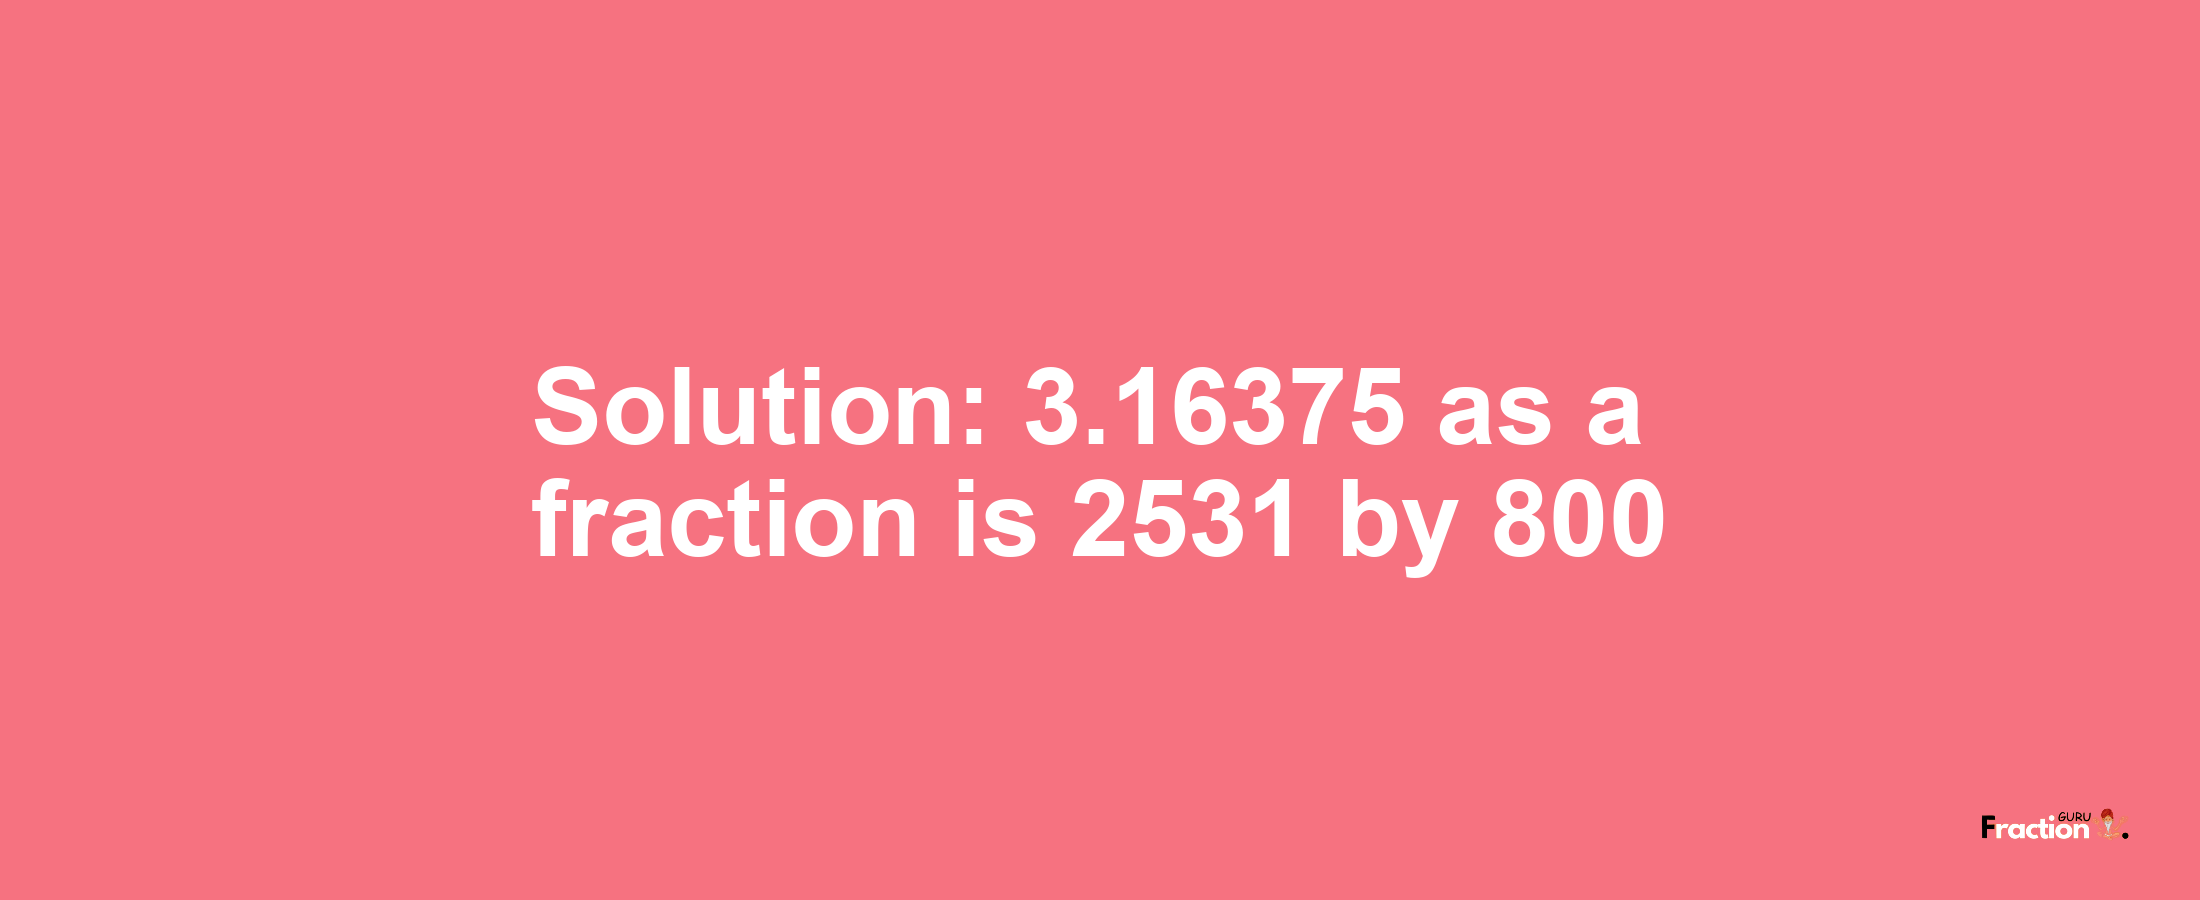 Solution:3.16375 as a fraction is 2531/800